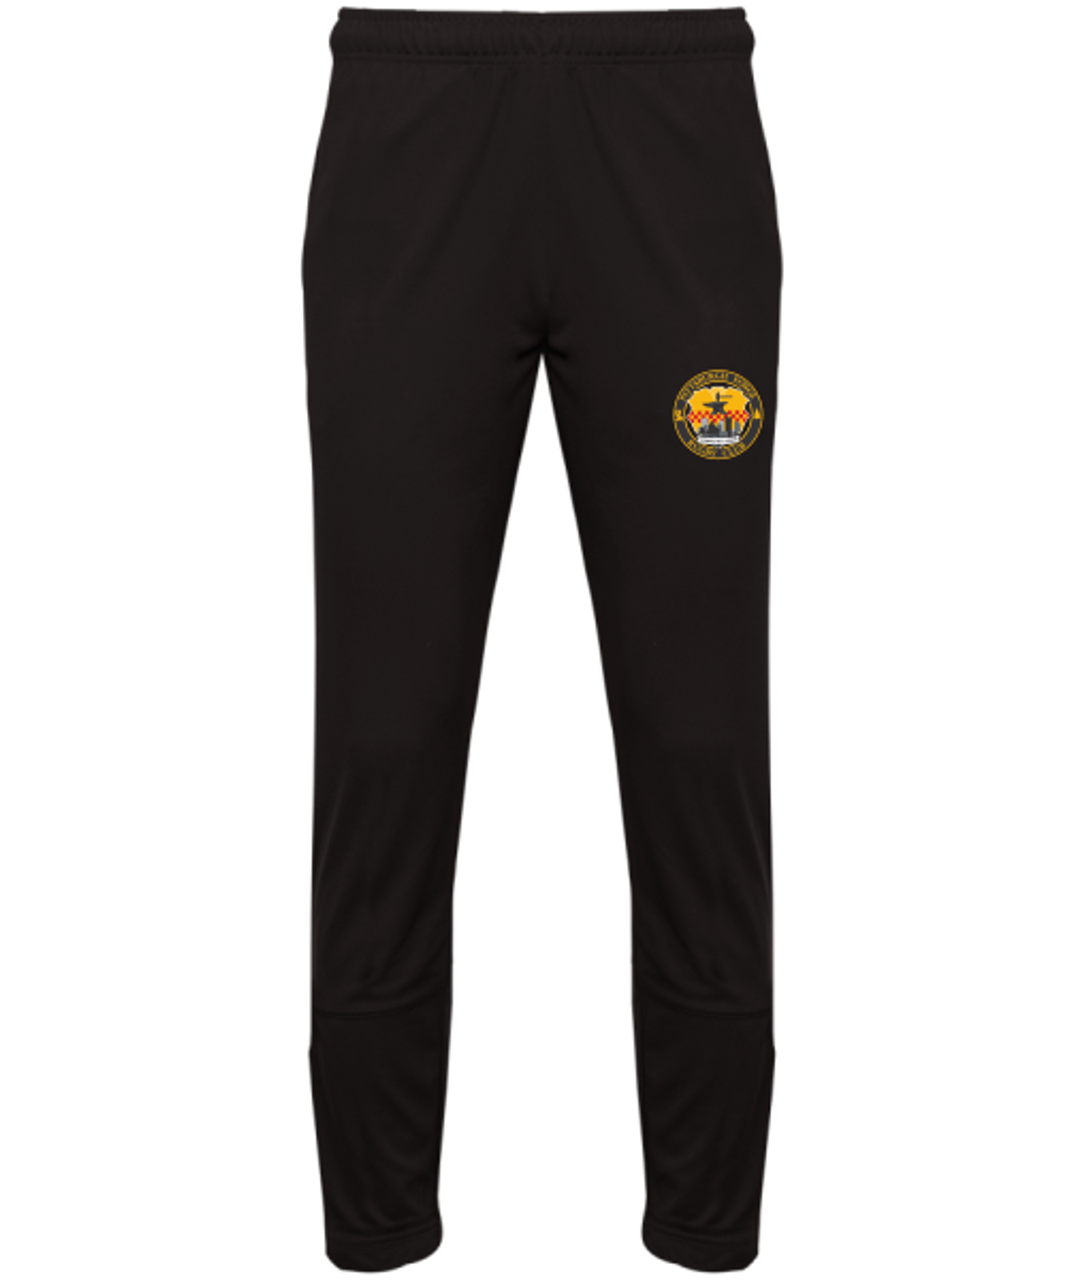 Forge Trainer Pants